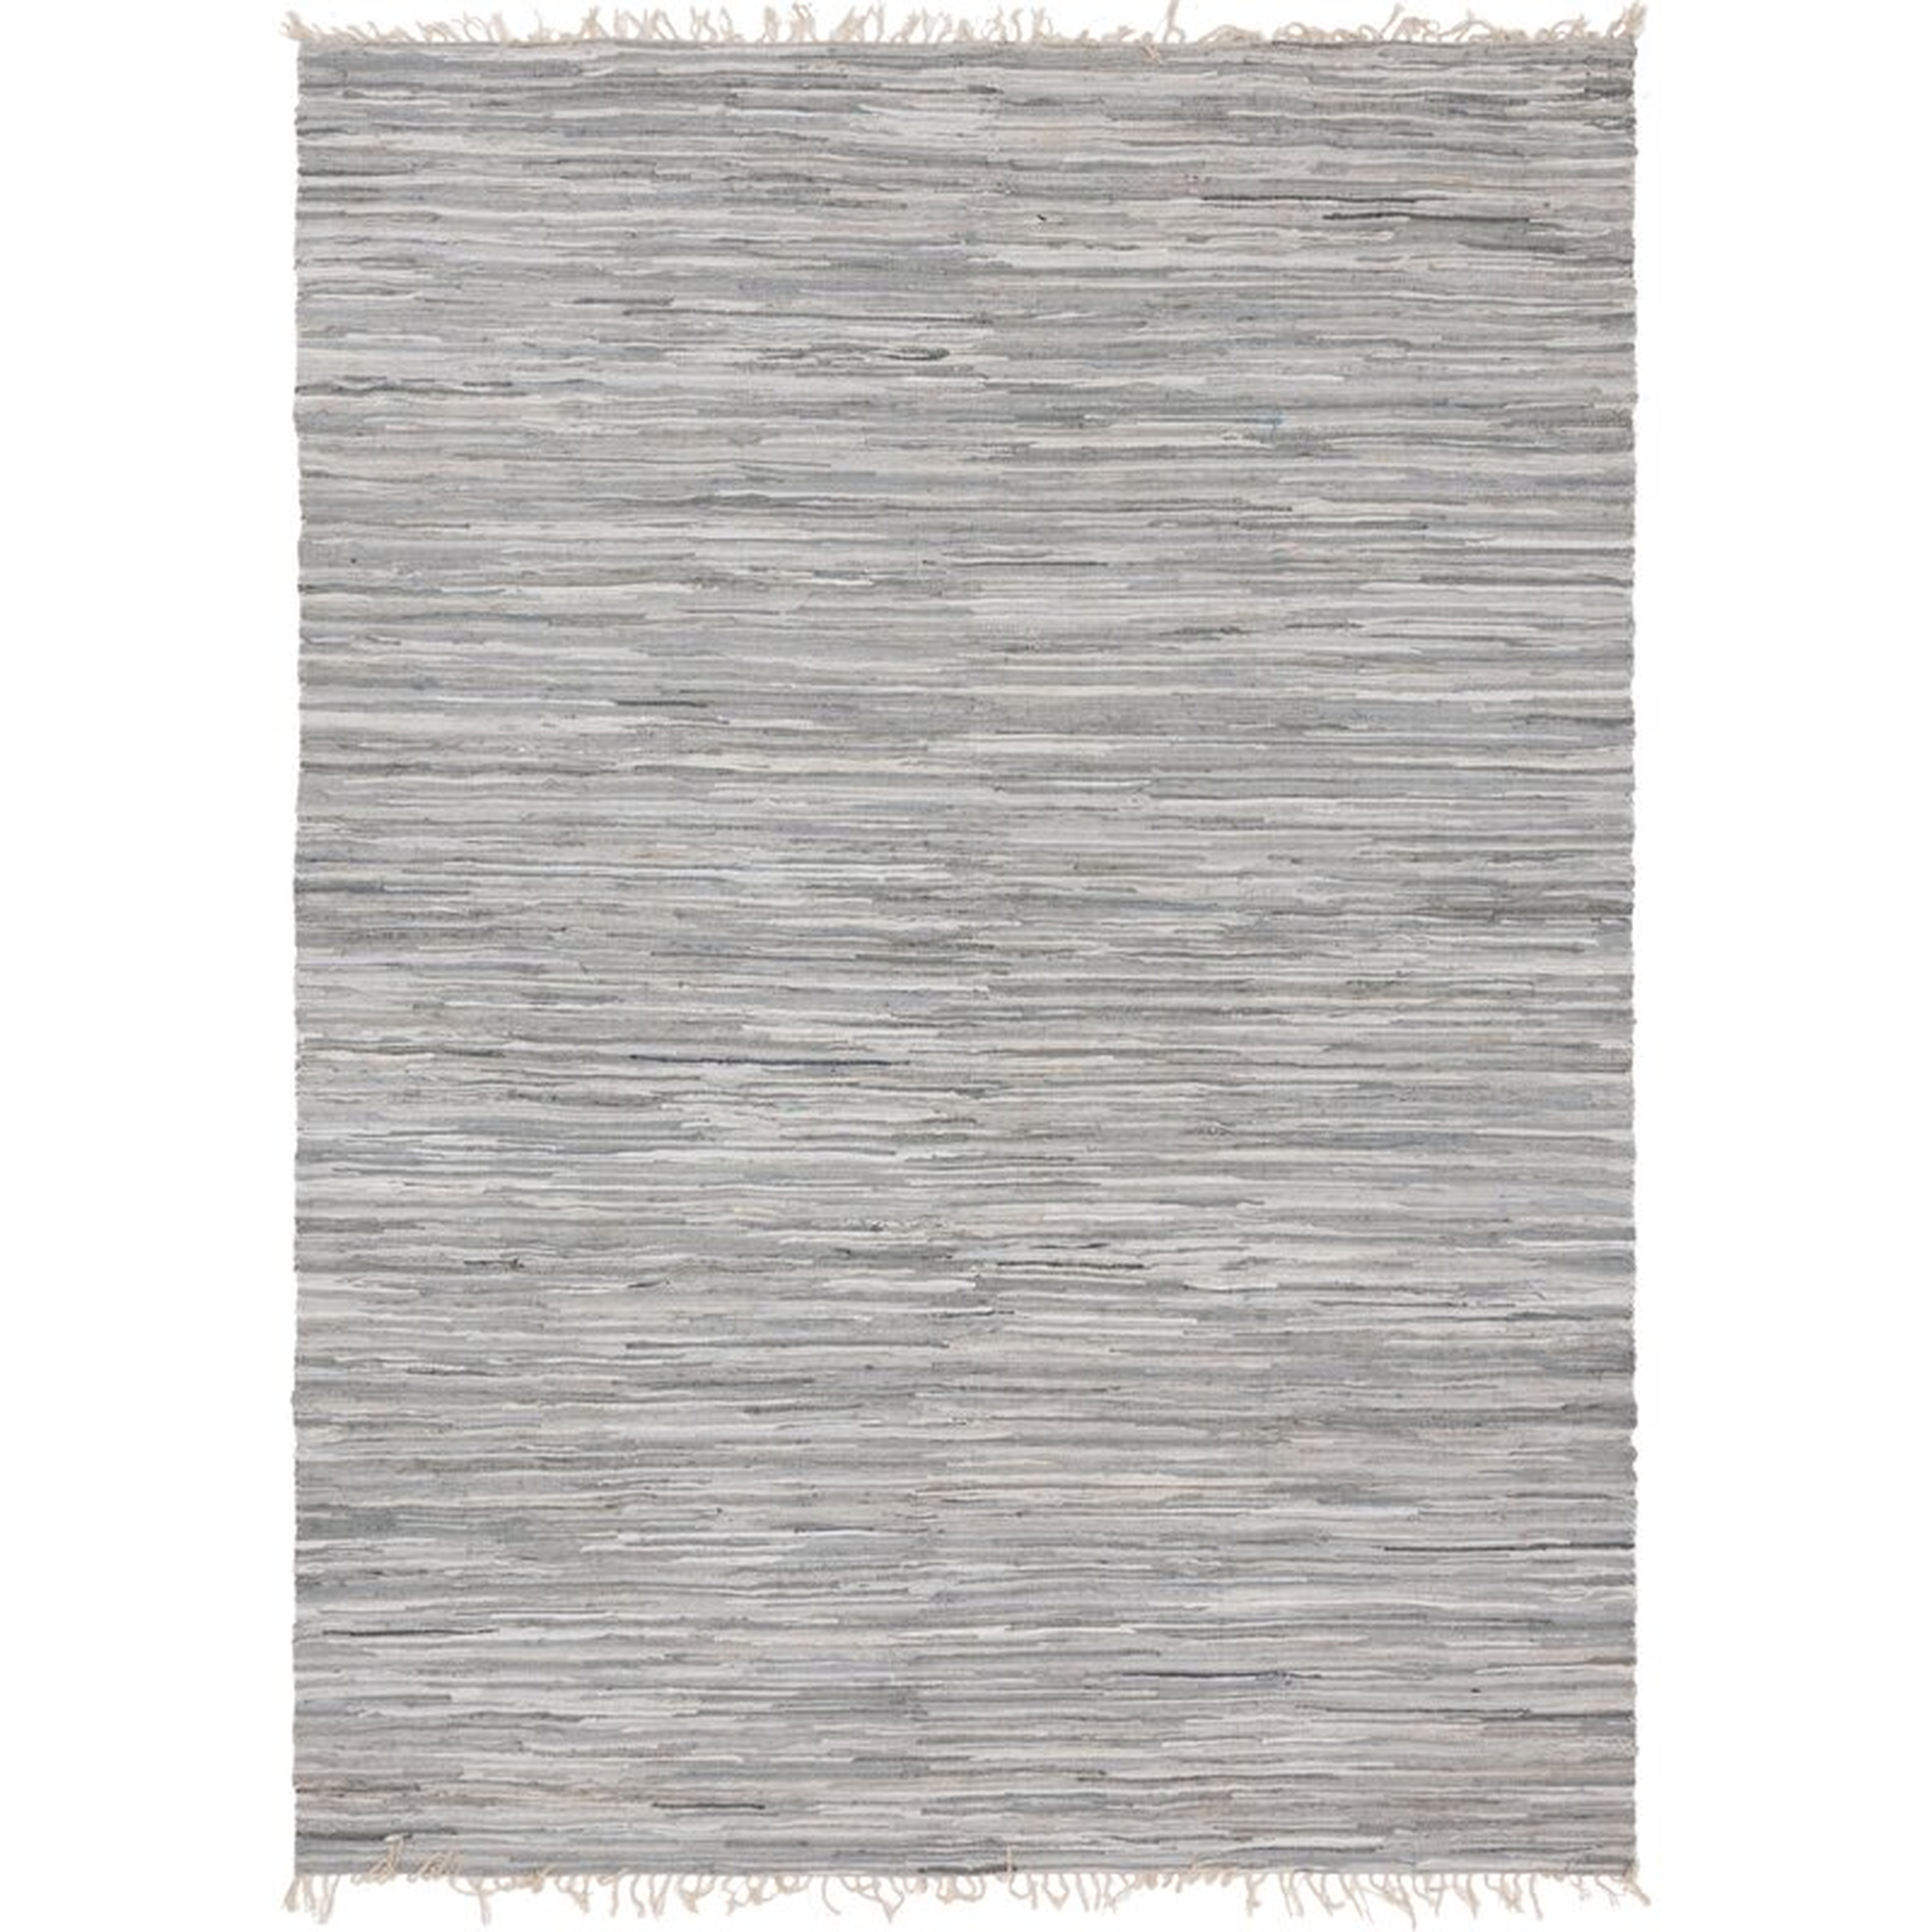 Marcell Chindi Hand-Knotted Cotton Gray Area Rug 9x12 - Wayfair